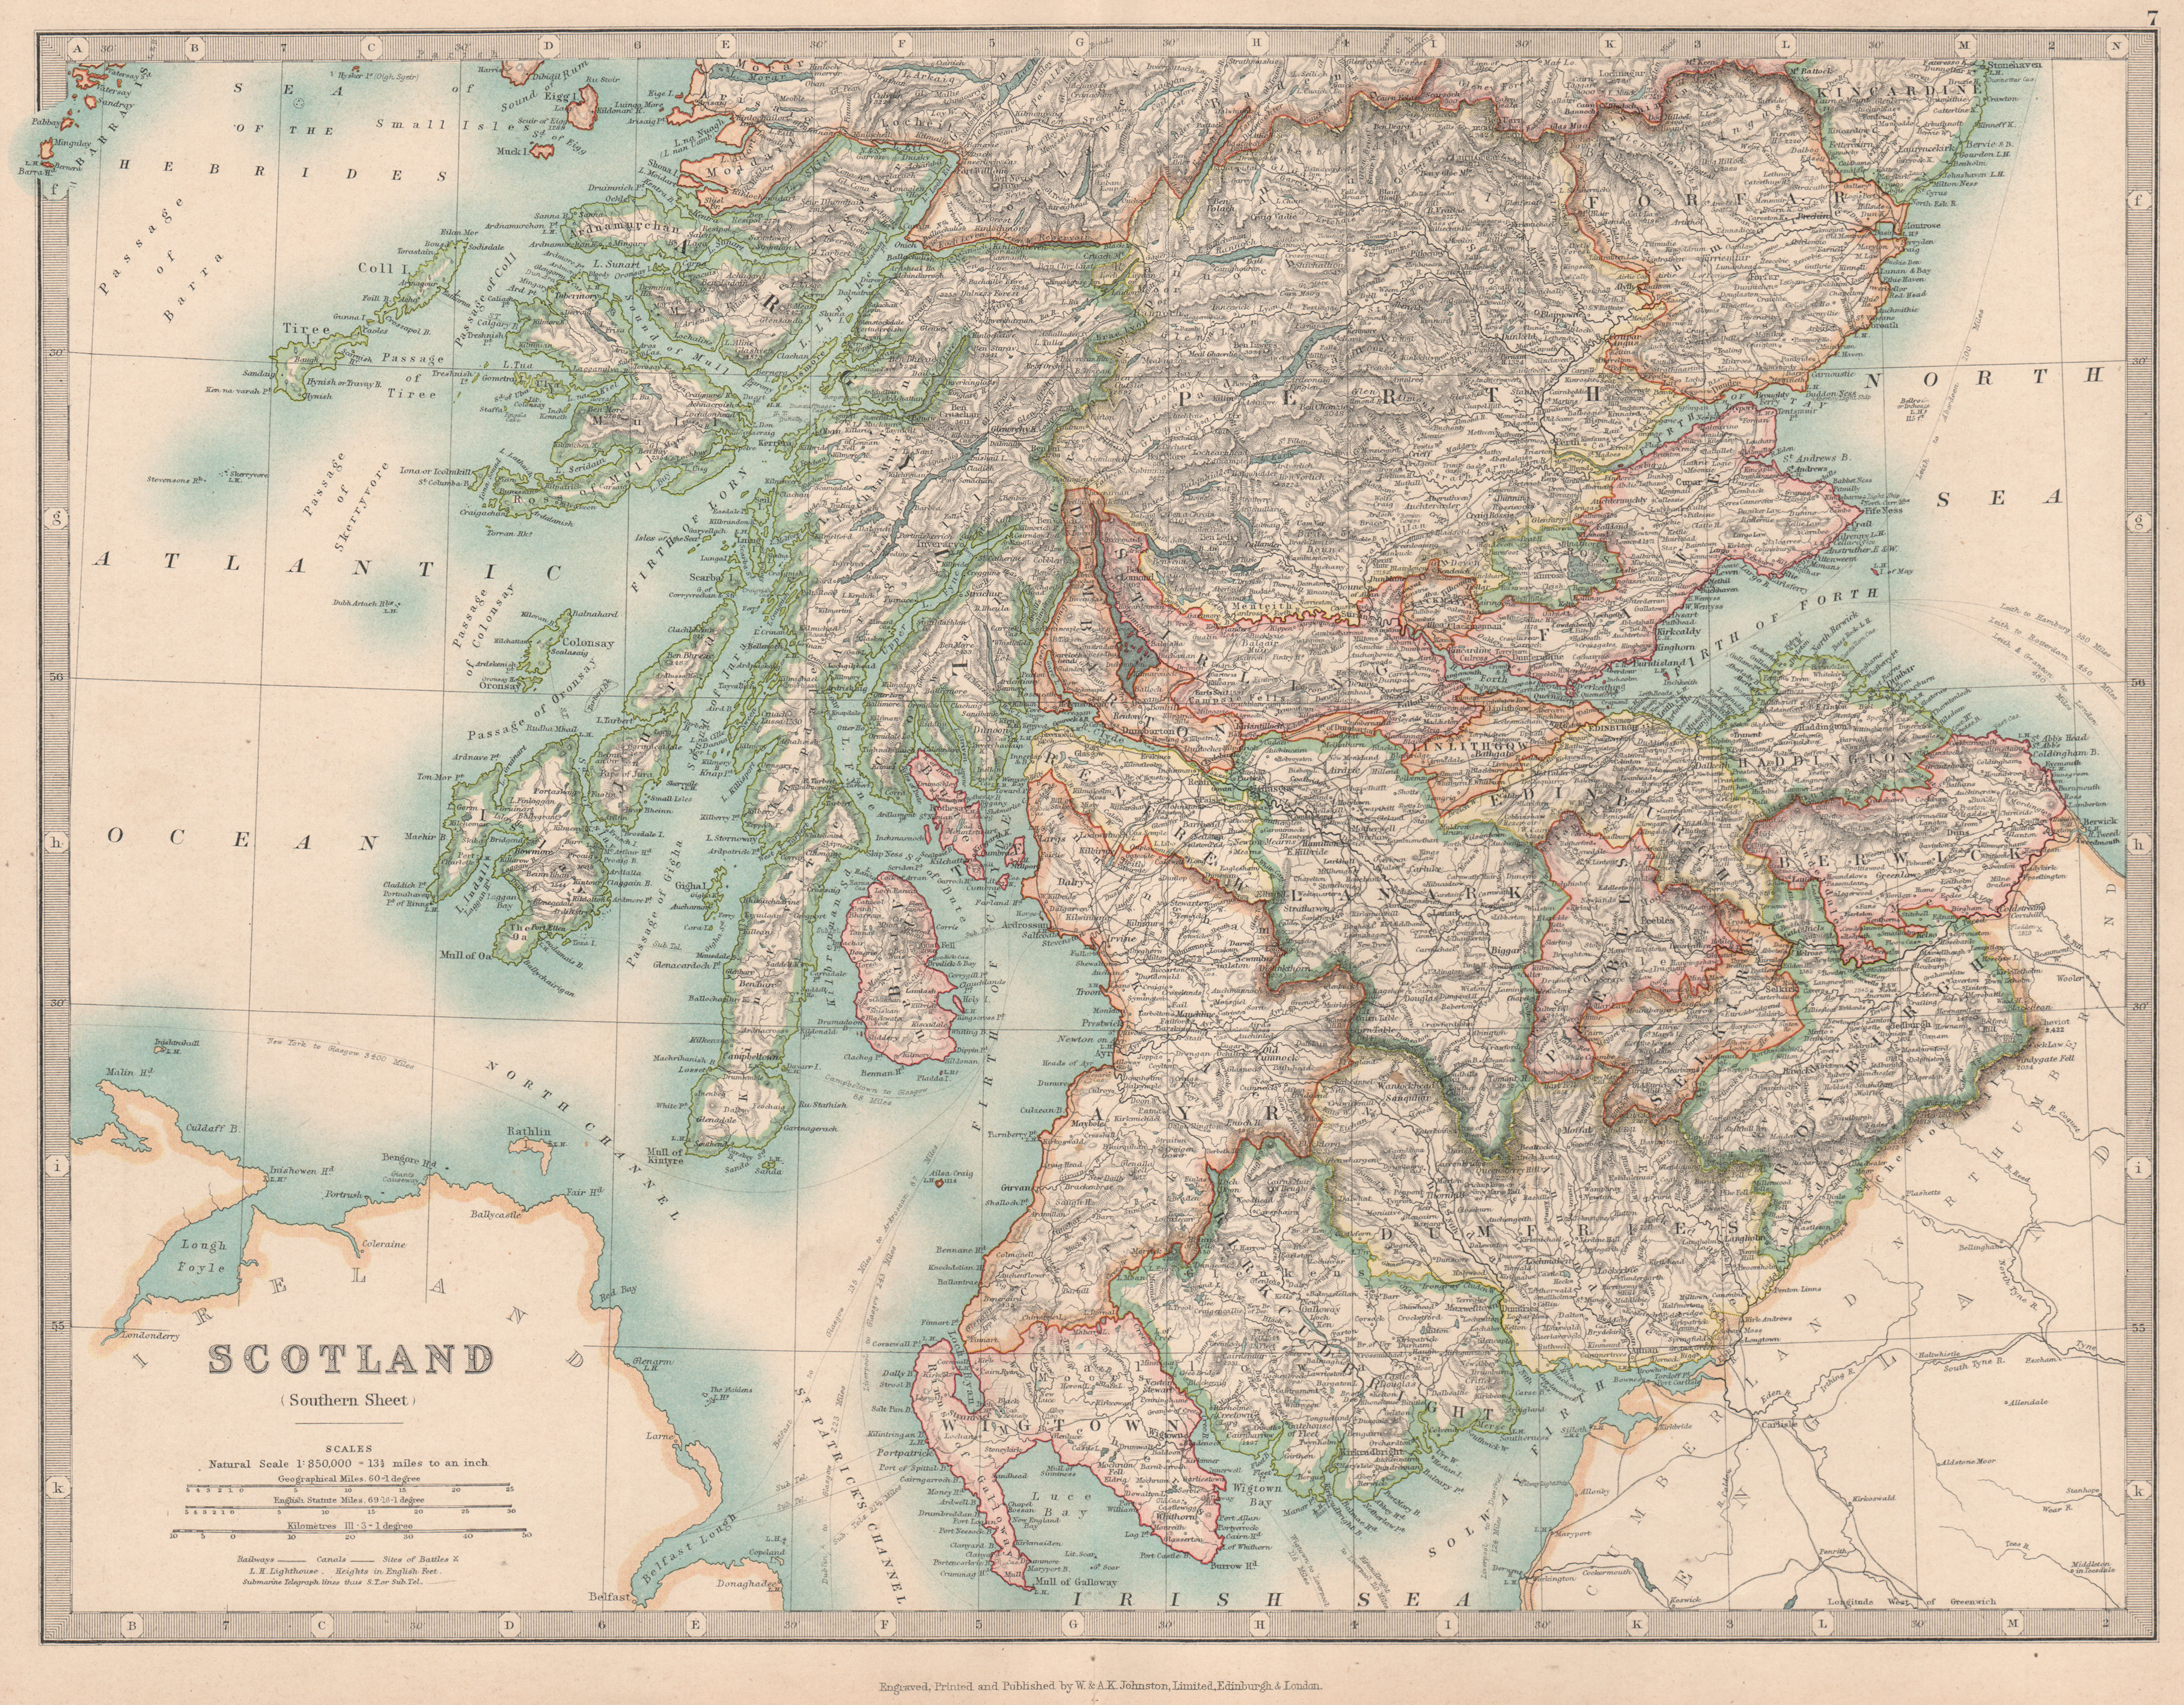 SOUTHERN SCOTLAND showing battlefields and dates. JOHNSTON 1912 old map